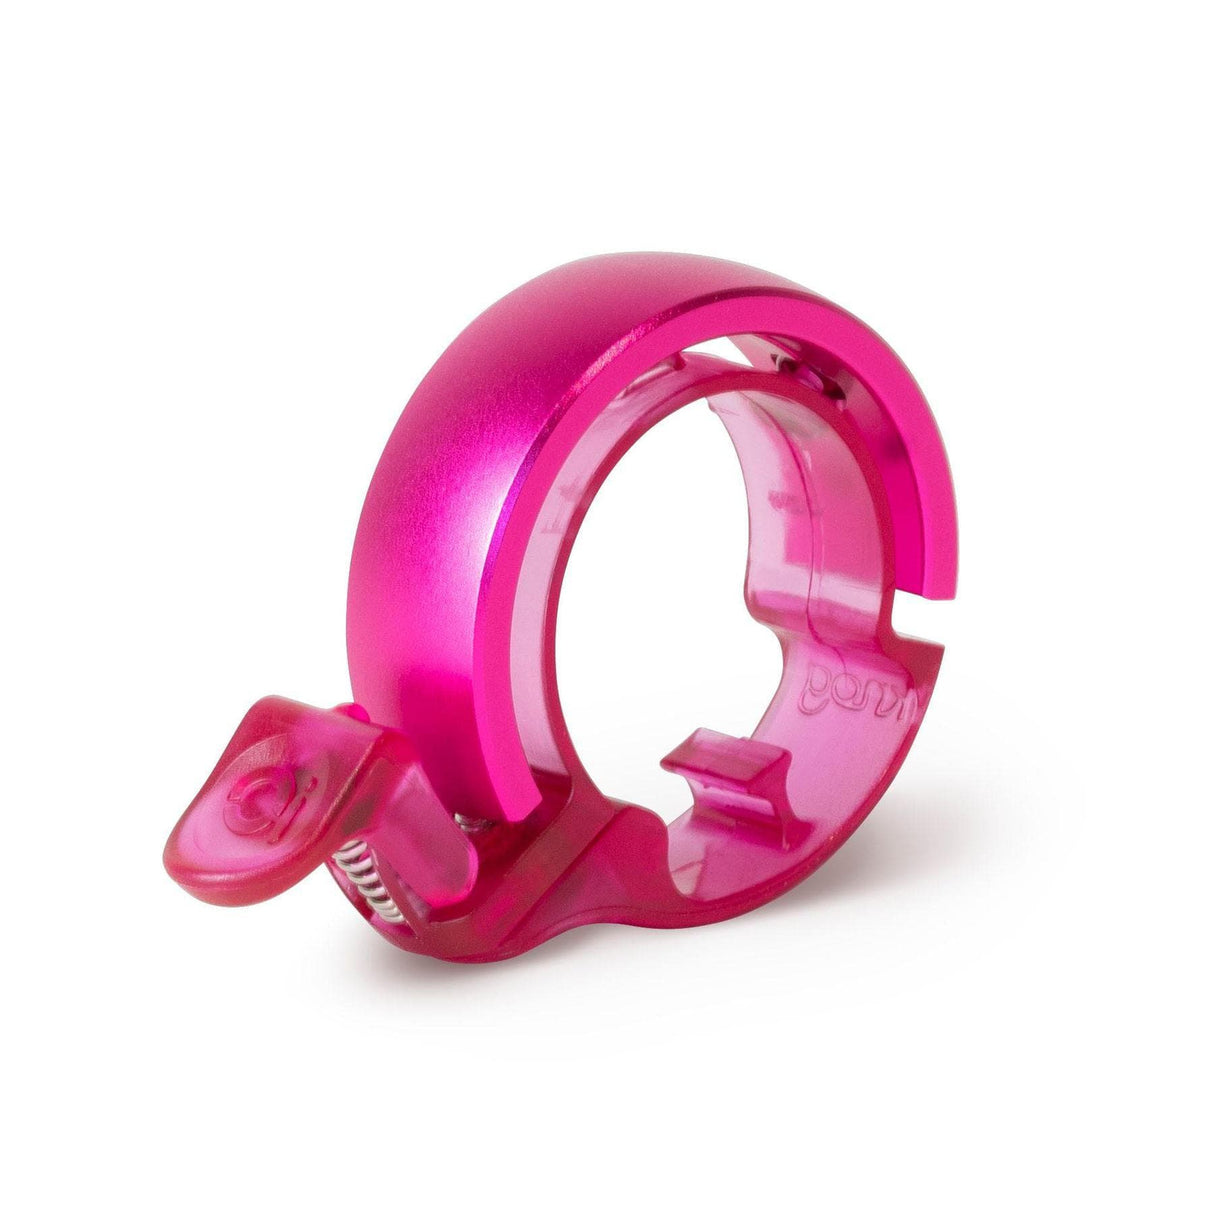 Knog Oi Classic Bicycle Bell - Limited Edition - Pink